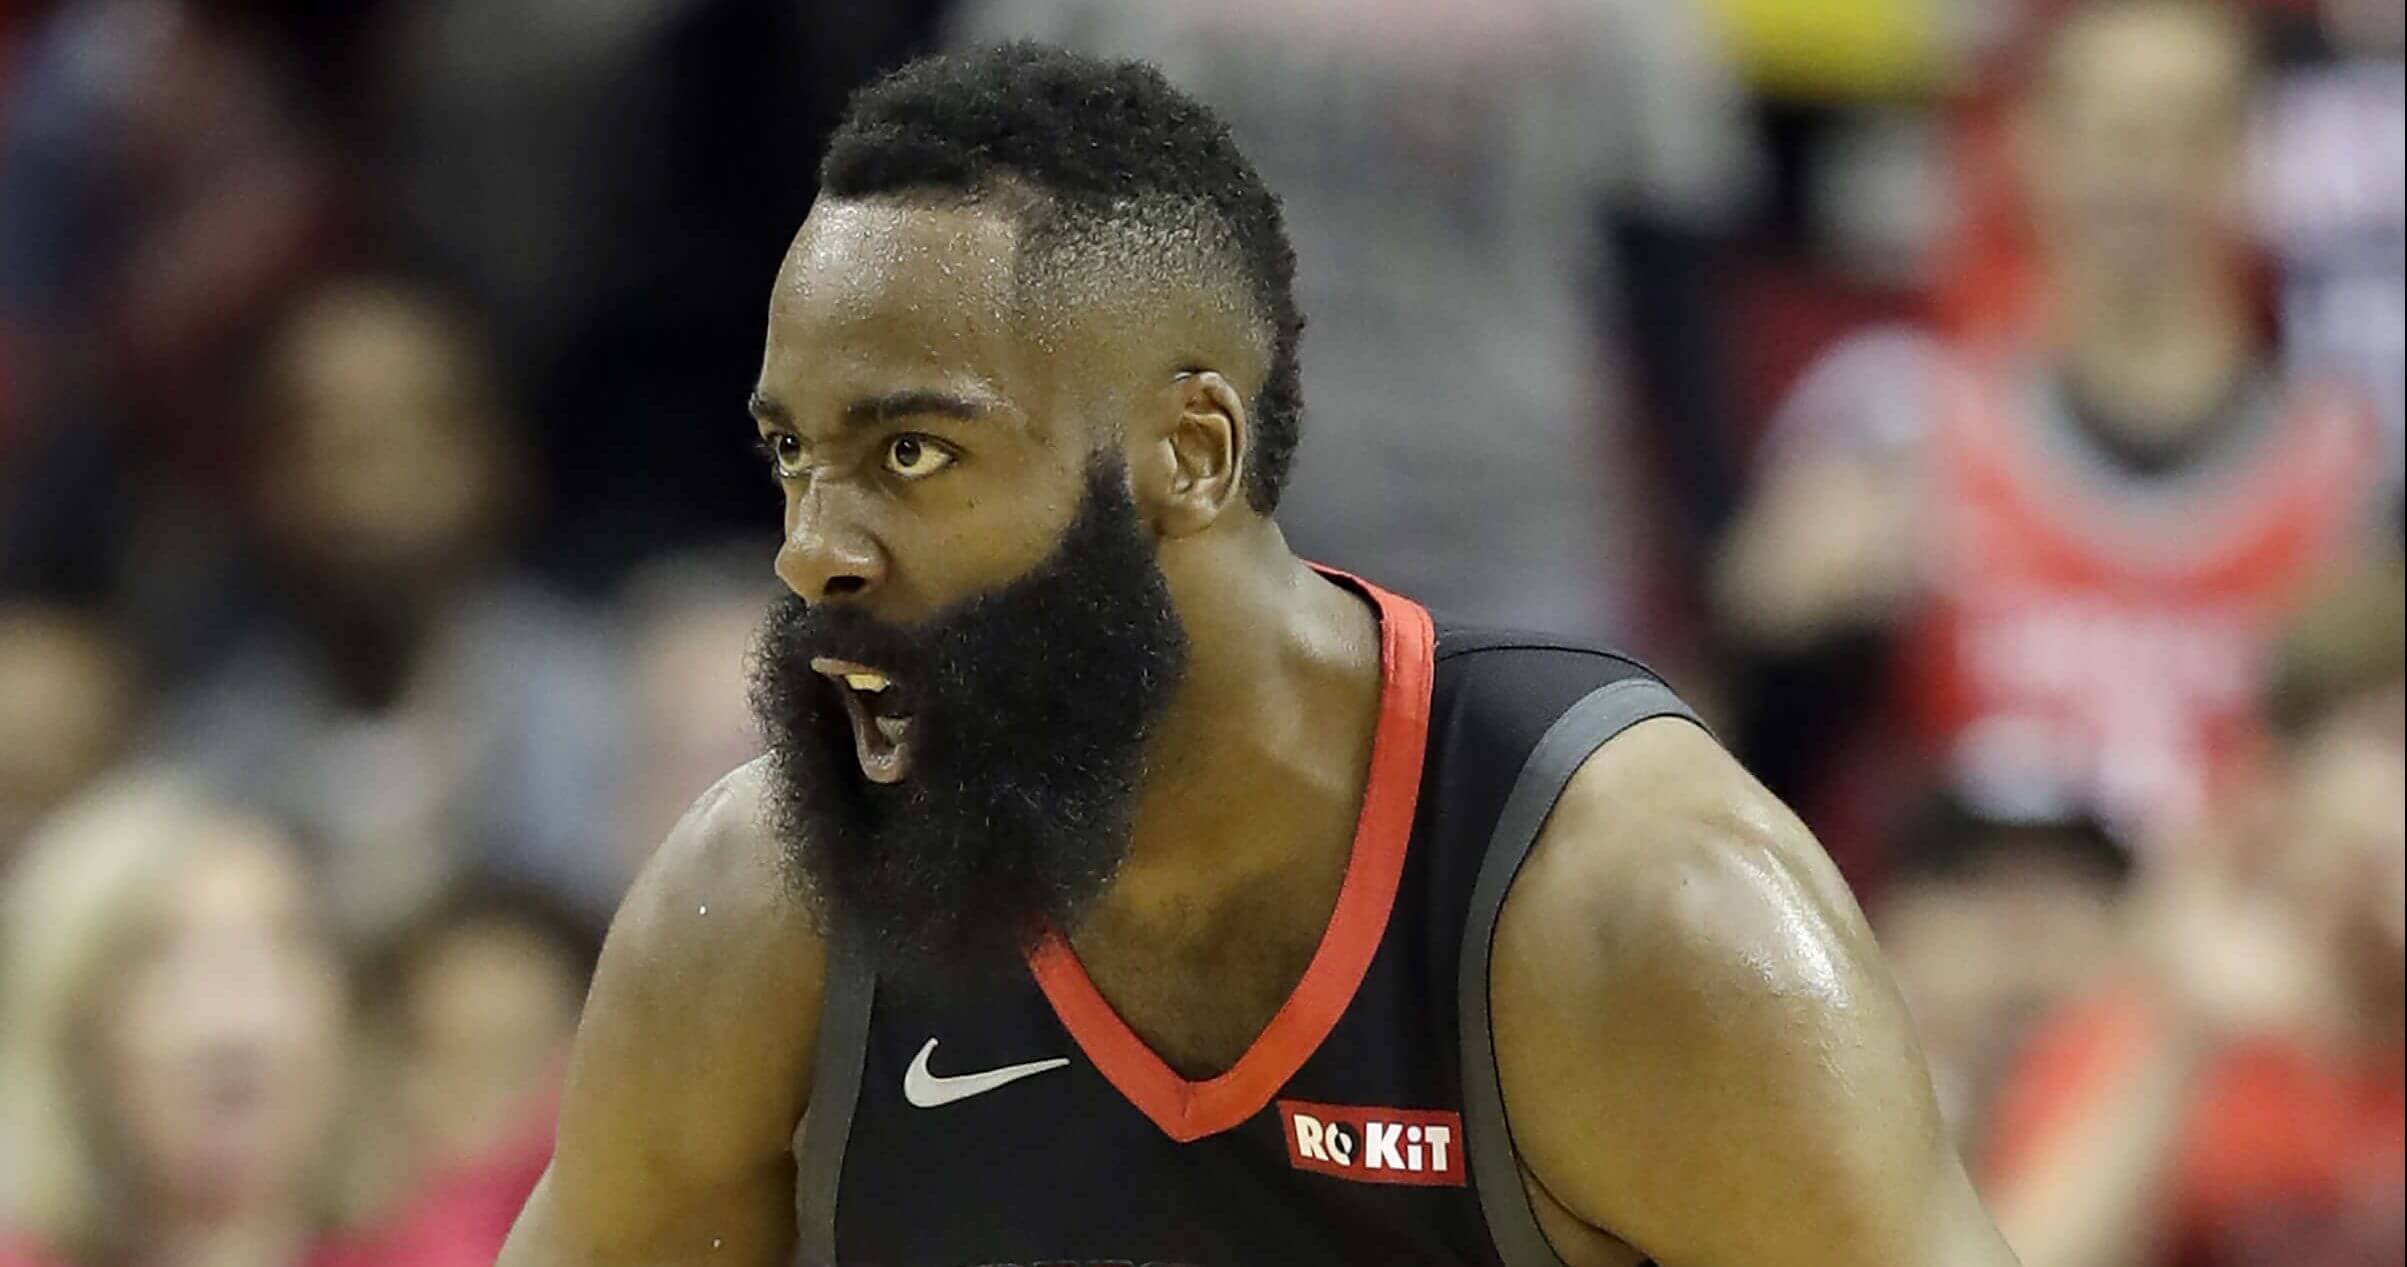 Houston Rockets' James Harden reacts after dunking the ball against the Los Angeles Lakers in the first half Thursday in Houston.